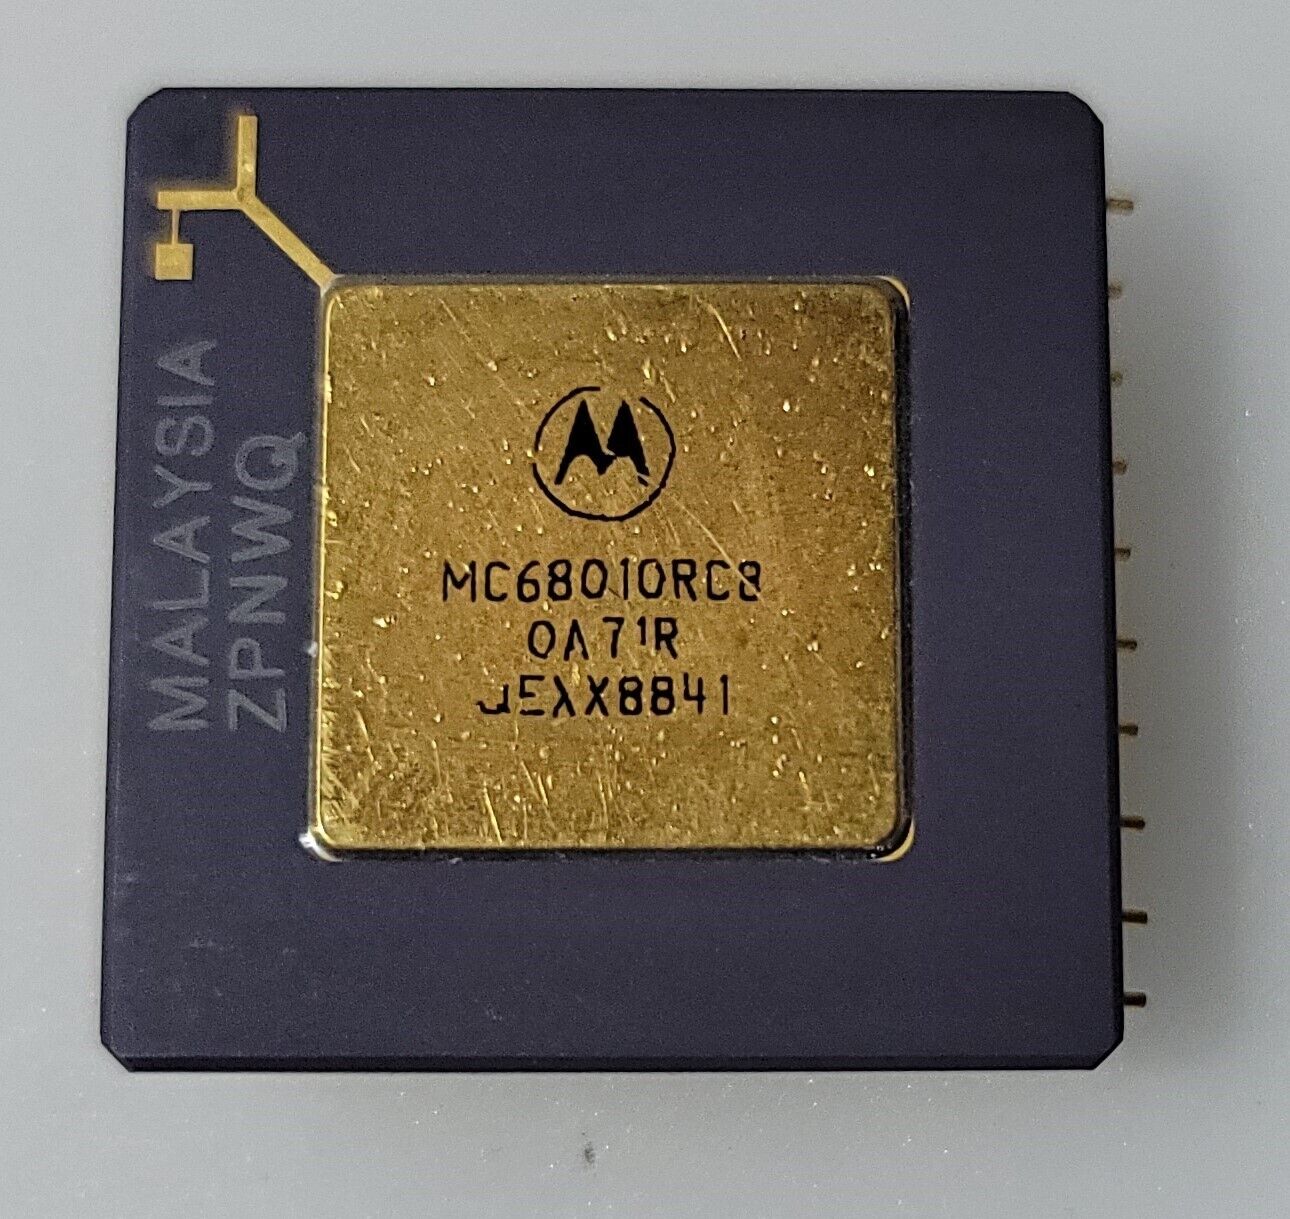 Vintage Rare Motorola MC68010RC8 Processor For Collection or Gold Recovery